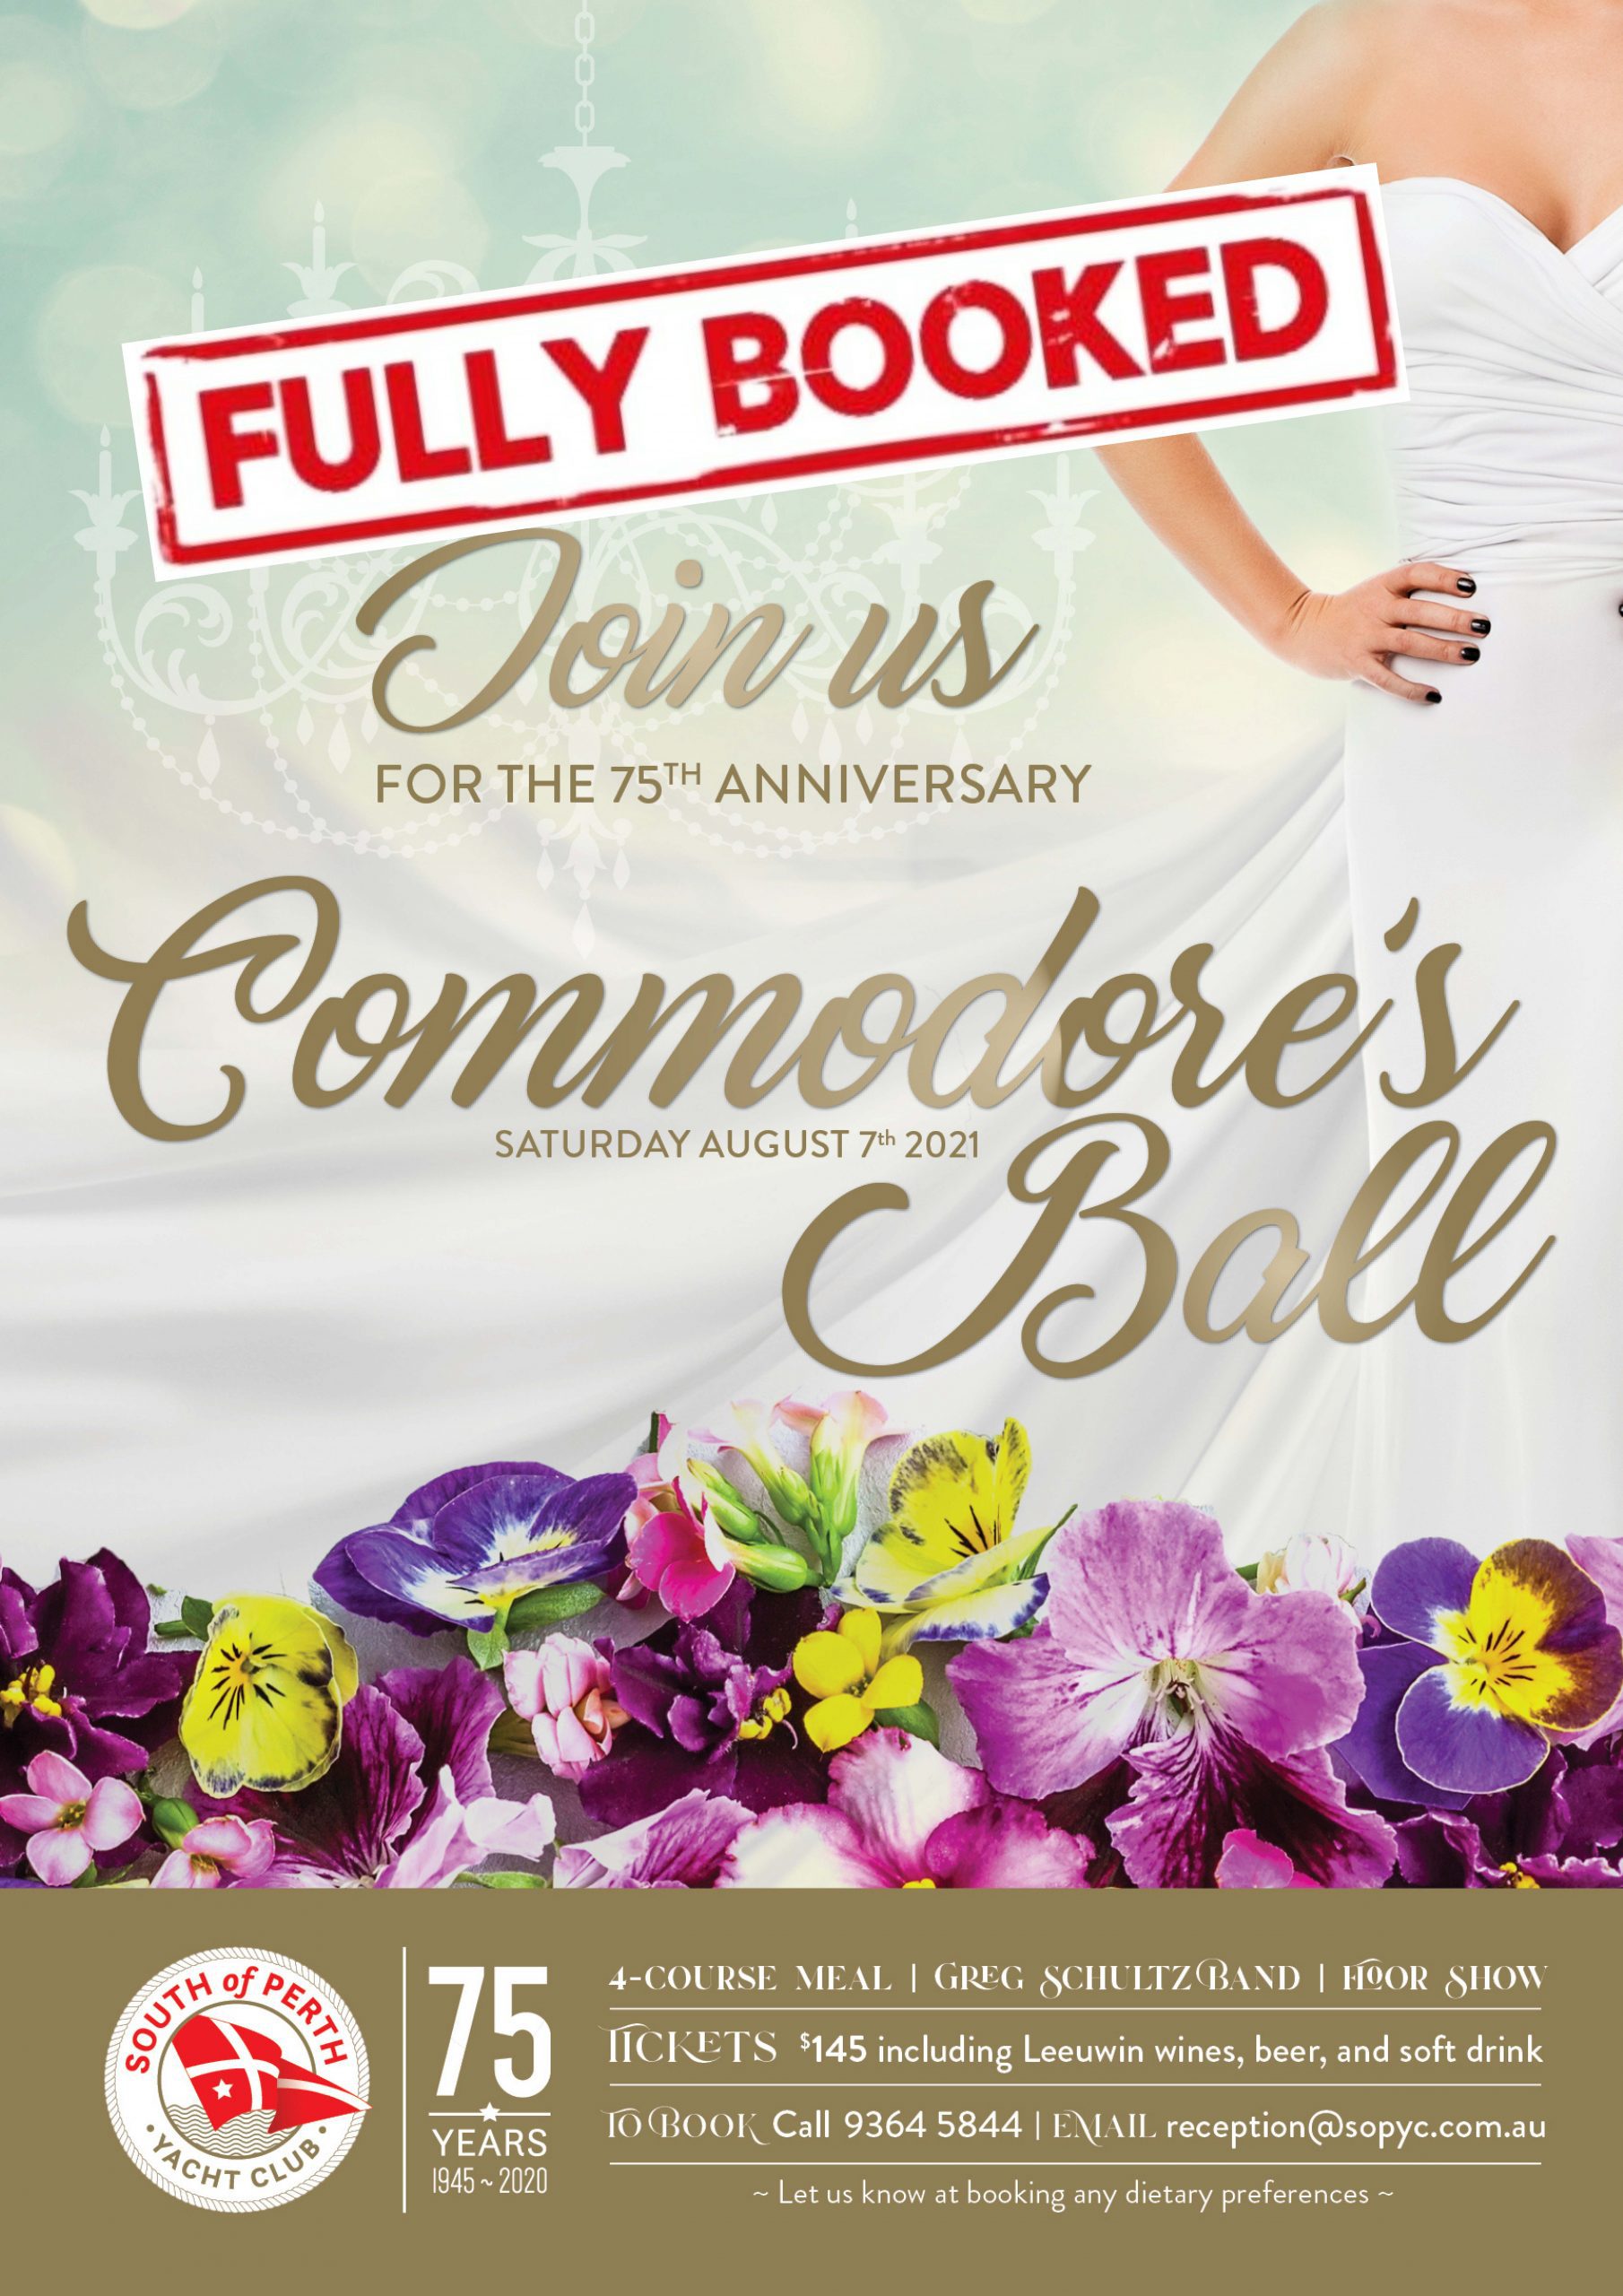 Commodore's Ball - Fully  Booked!